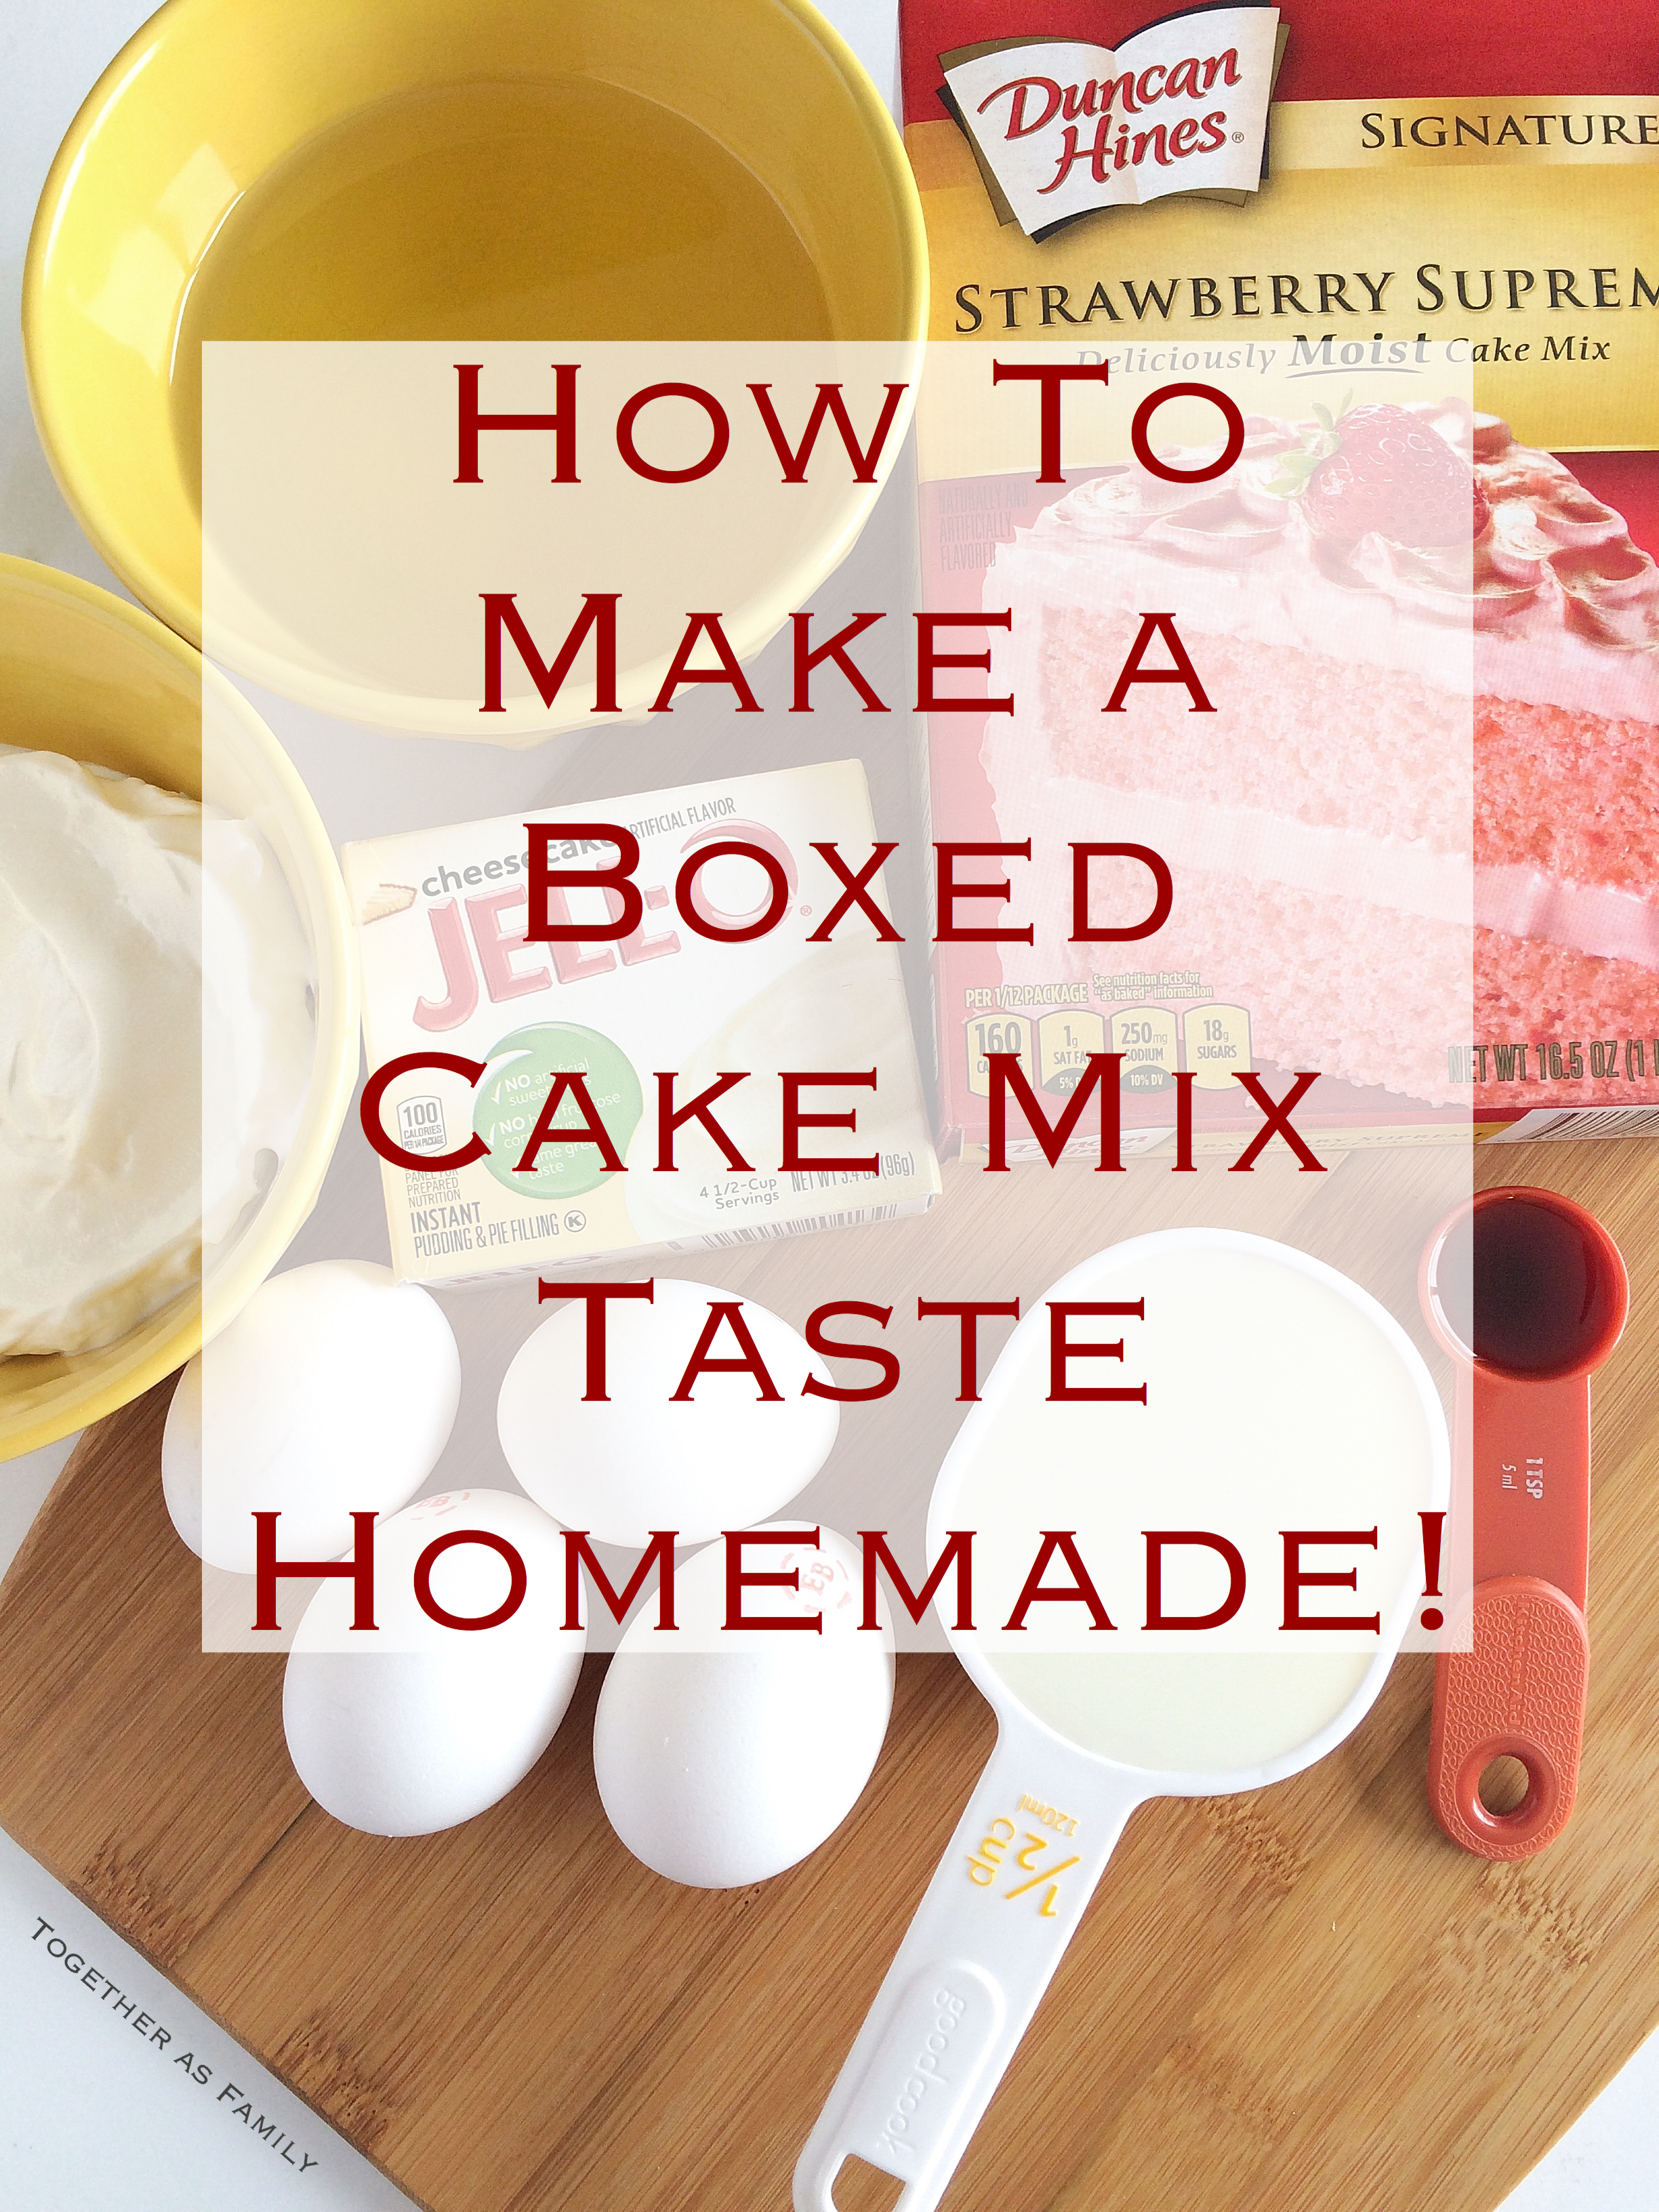 How many cupcakes does one box of cake mix make?